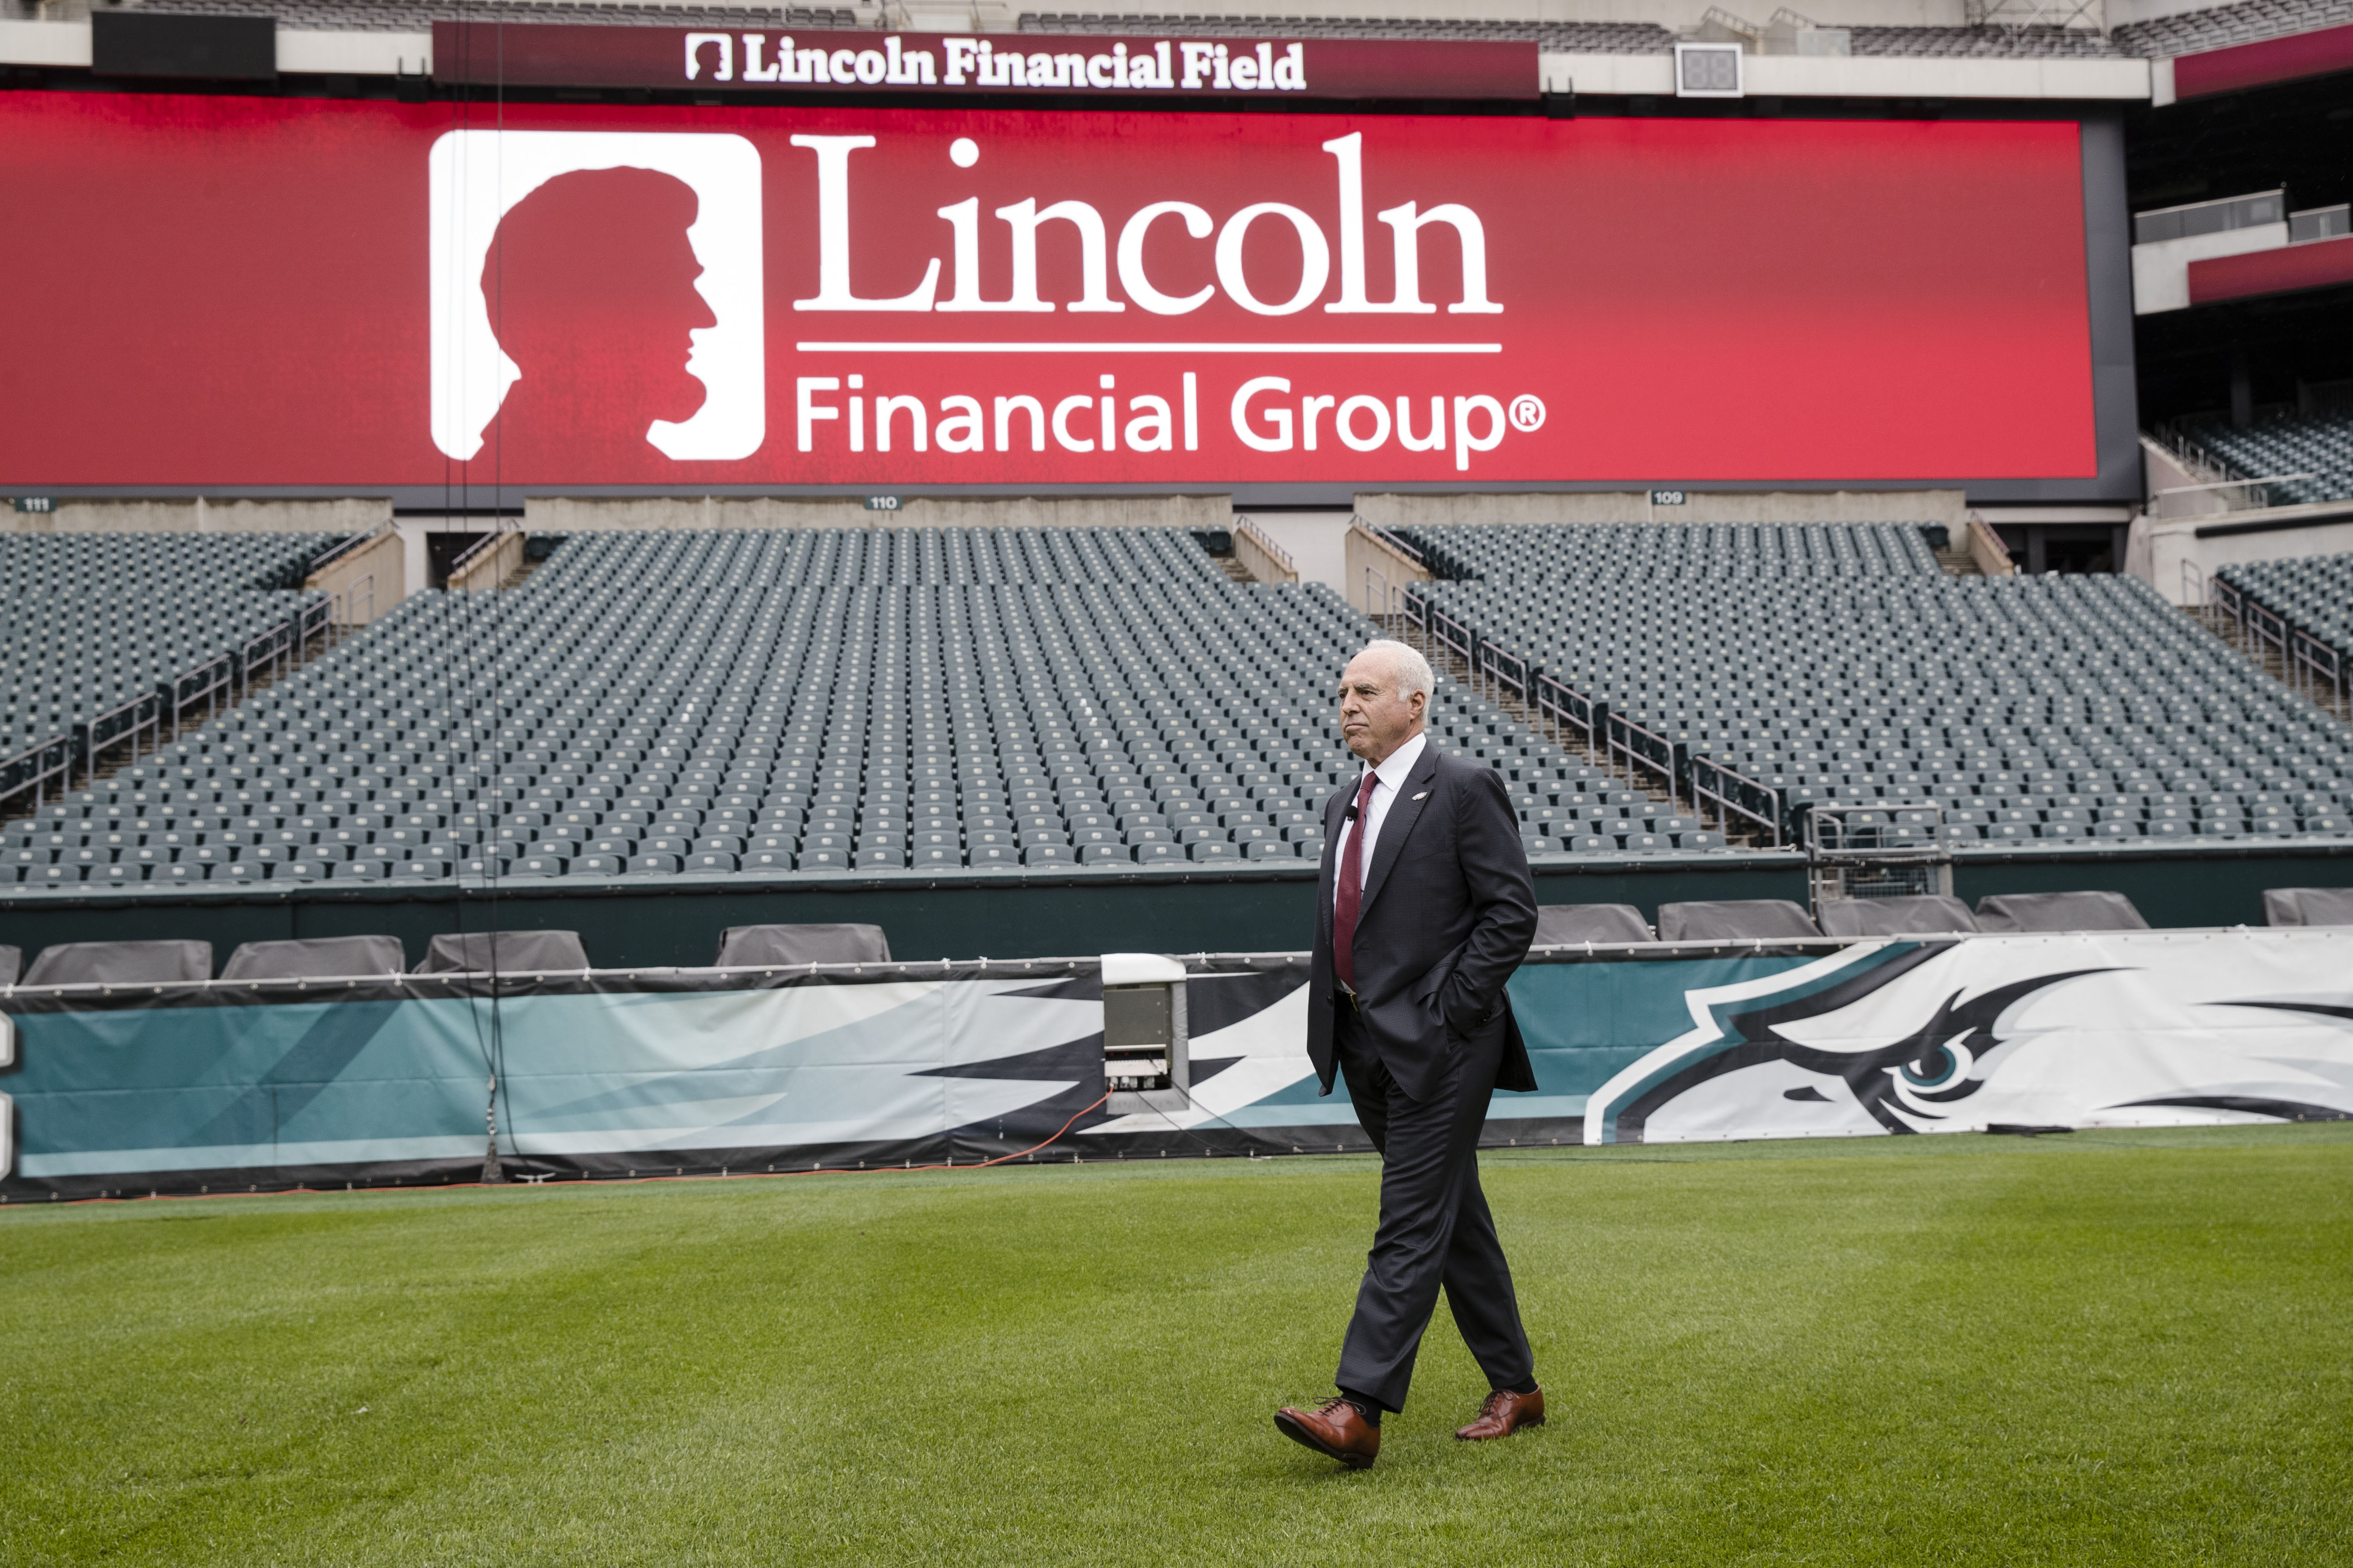 Philadelphia Eagles' Jeffrey Lurie offers Lincoln Financial Field as  polling place in 2020 election 